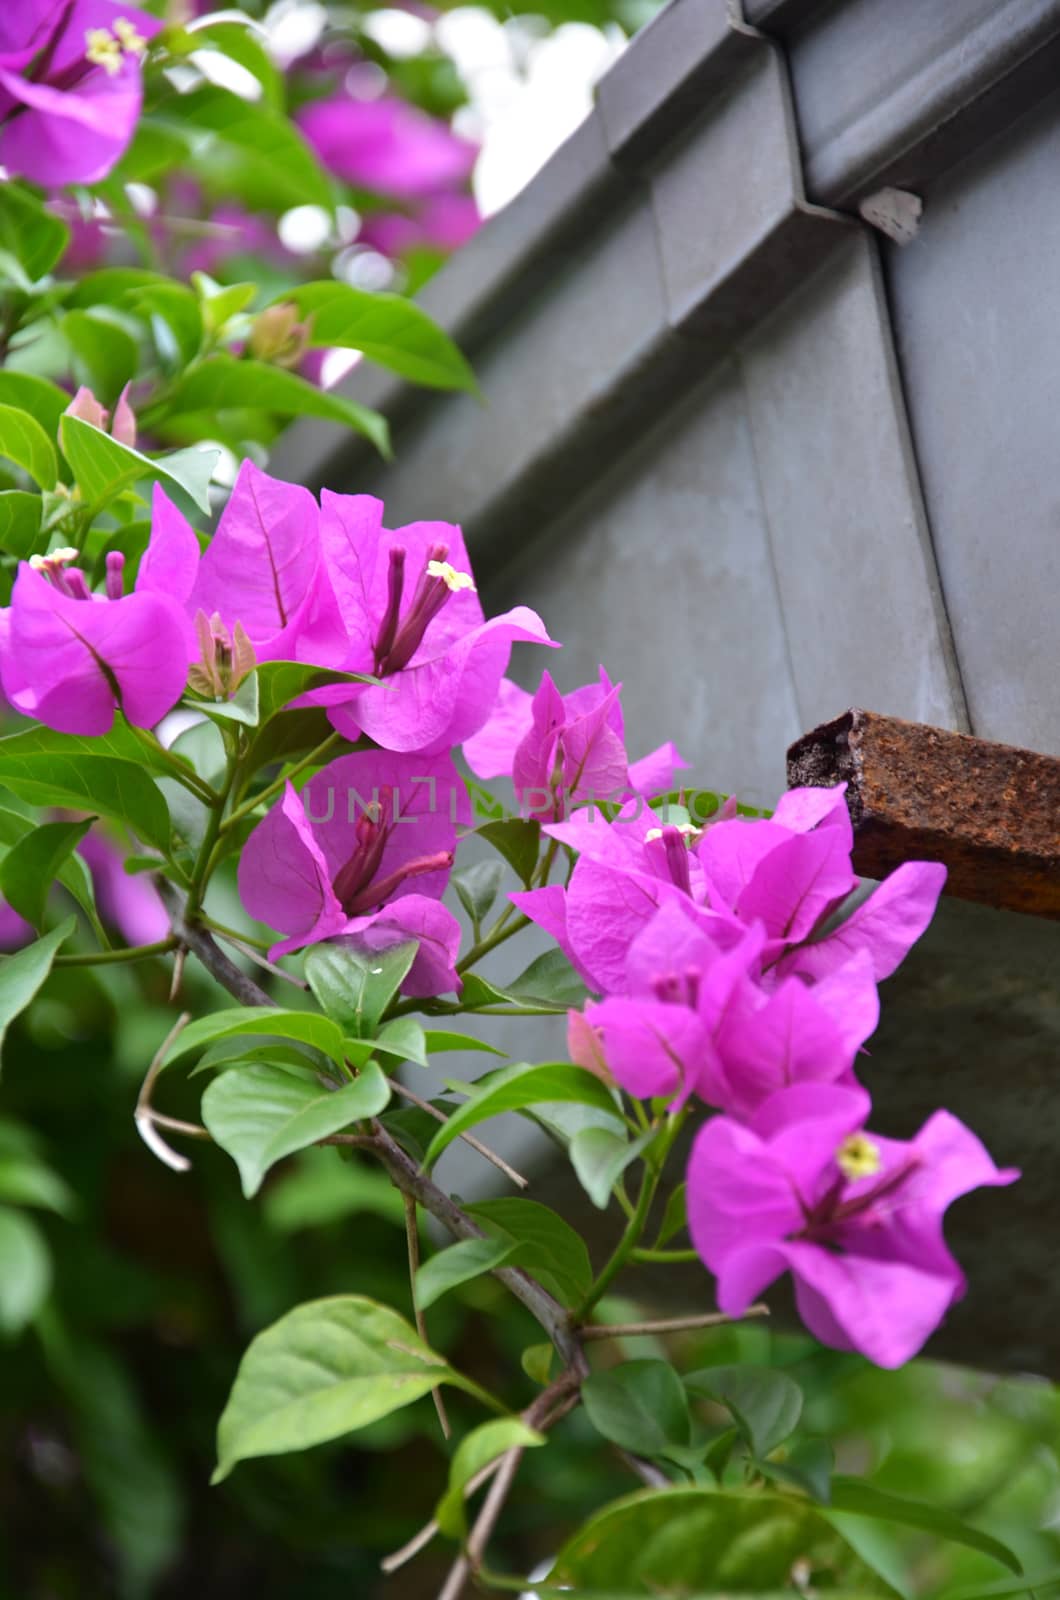 The pink Bougainvillea or Paper flower or Bougainvillea hybrida in the garden